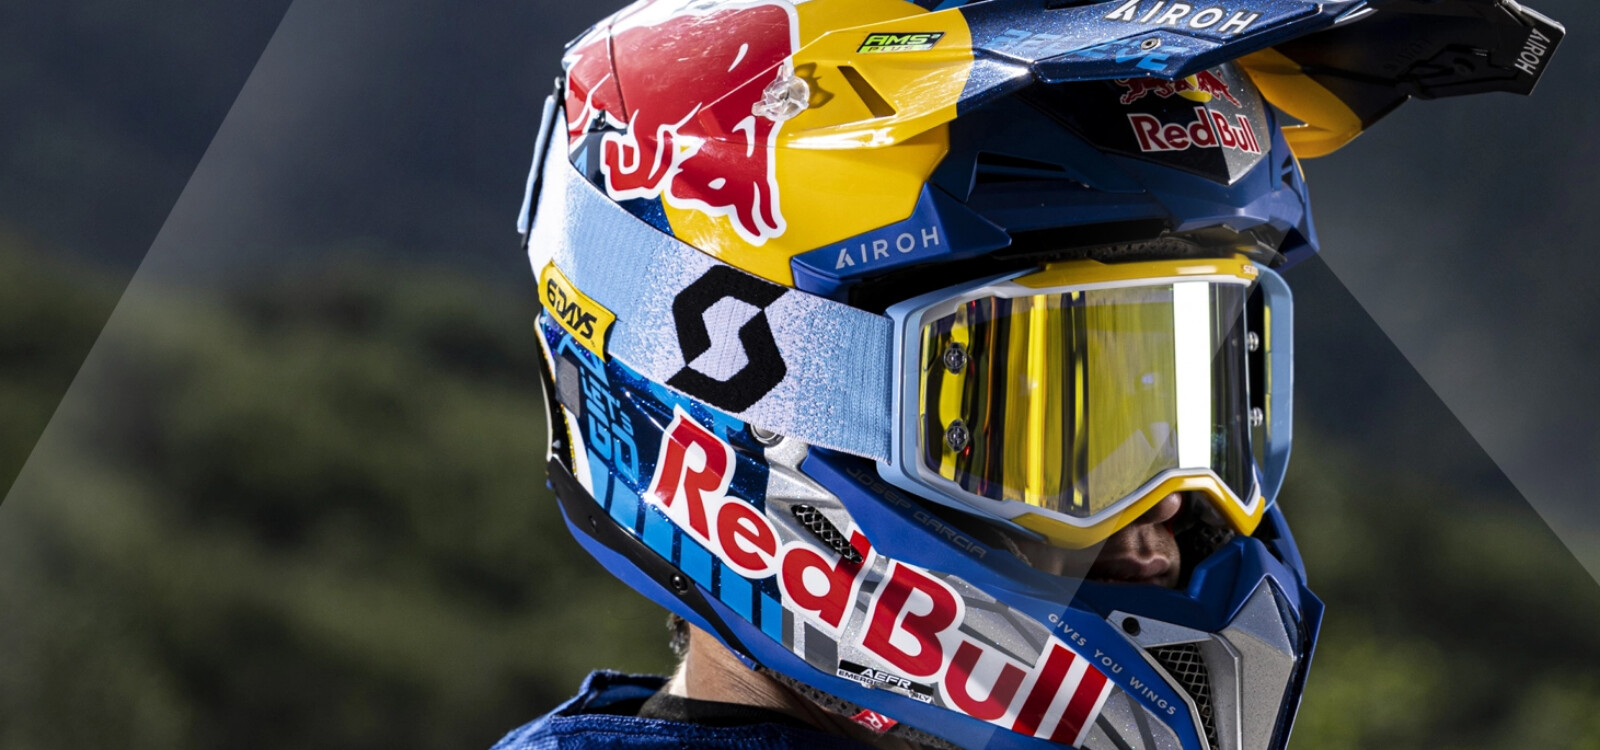 Motocross and Dirt Bike Helmets and Gear